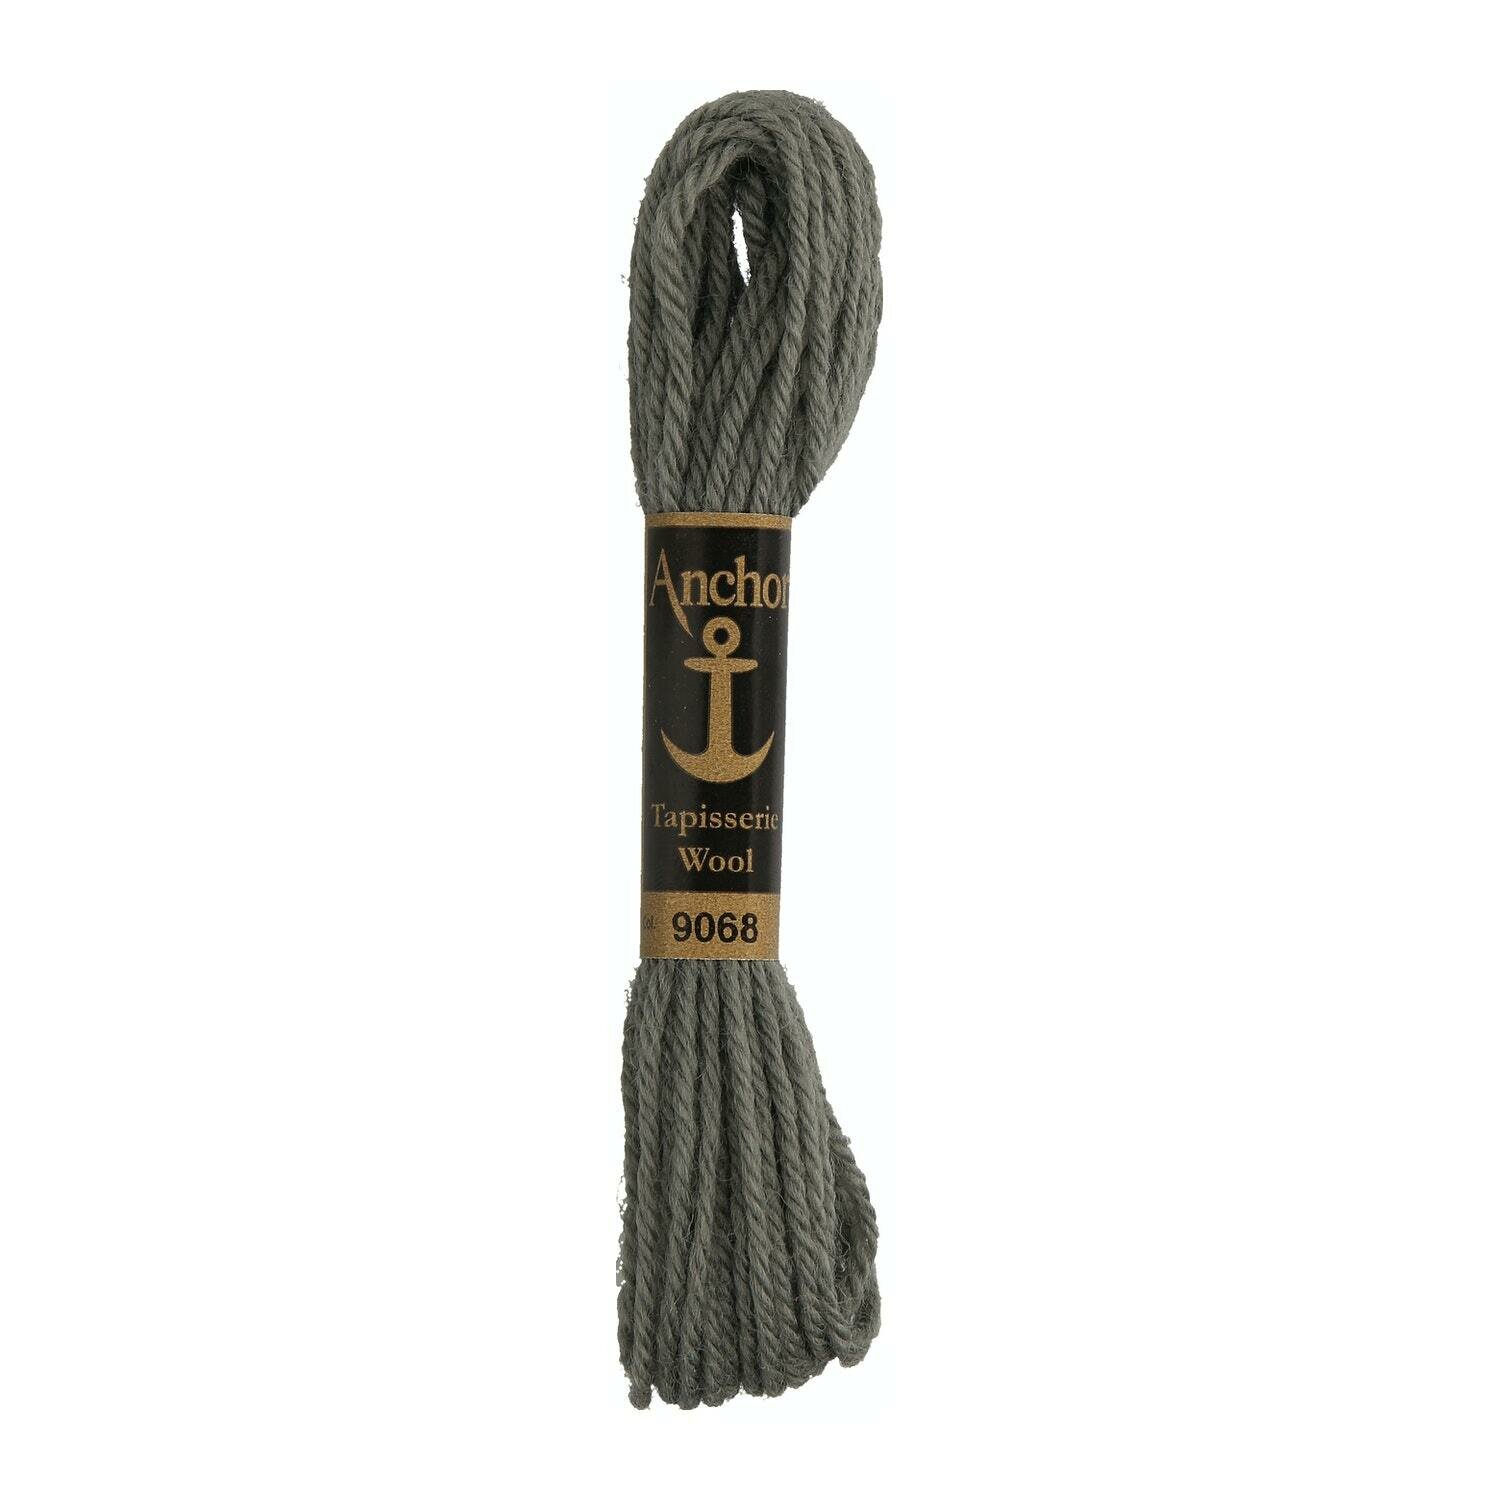 Anchor Tapisserie Wool # 09068